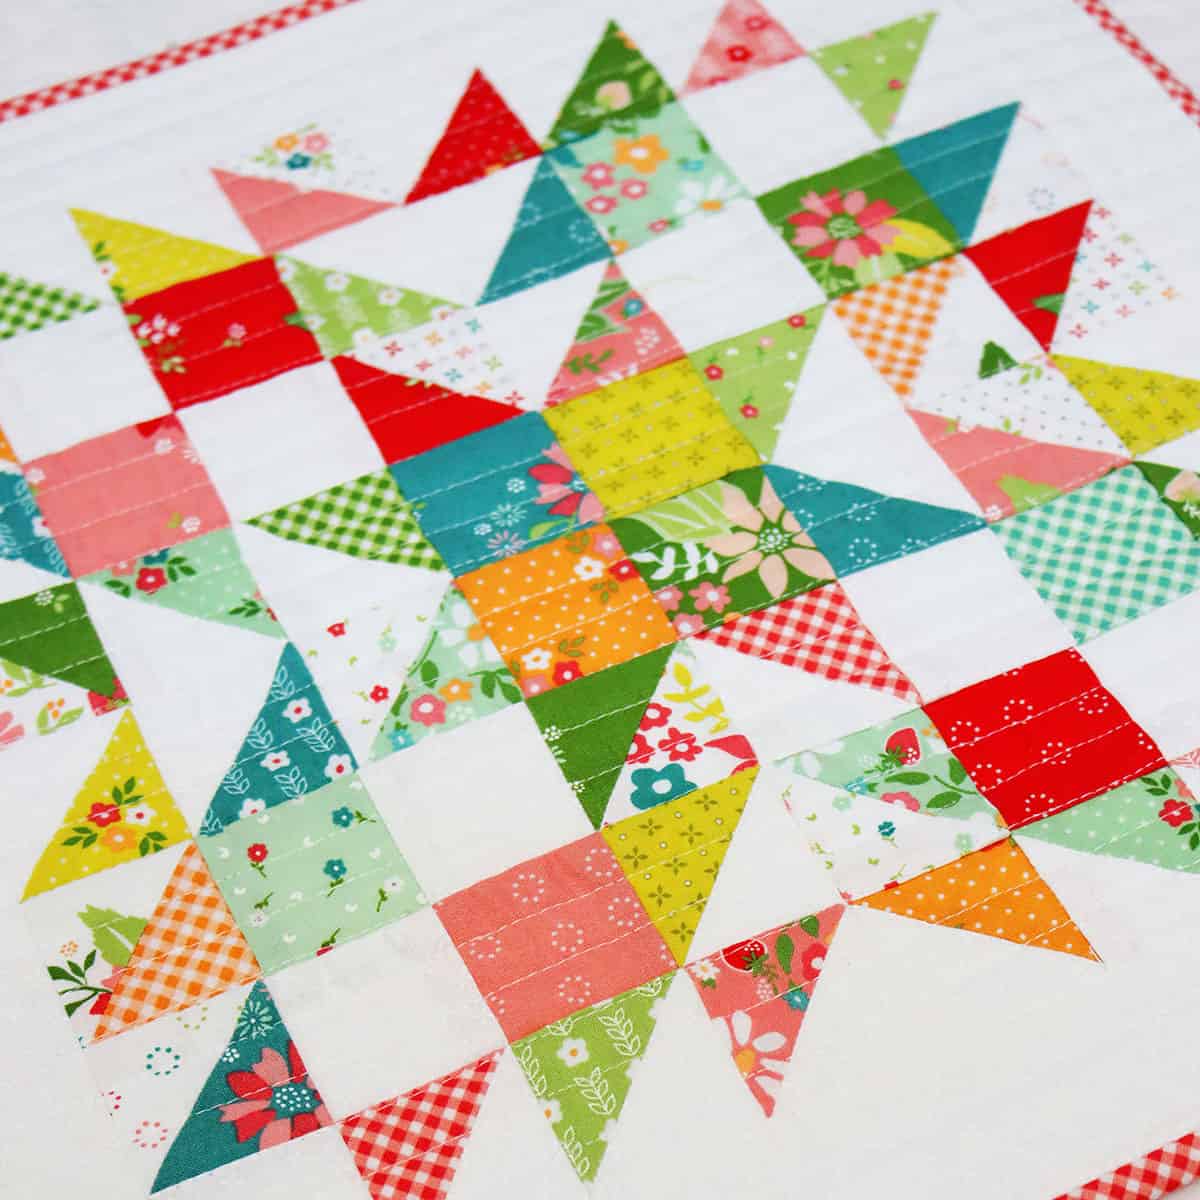 Summer Star Medley & More with Strawberry Lemonade fabric featured by Top US Quilt Blog, A Quilting Life